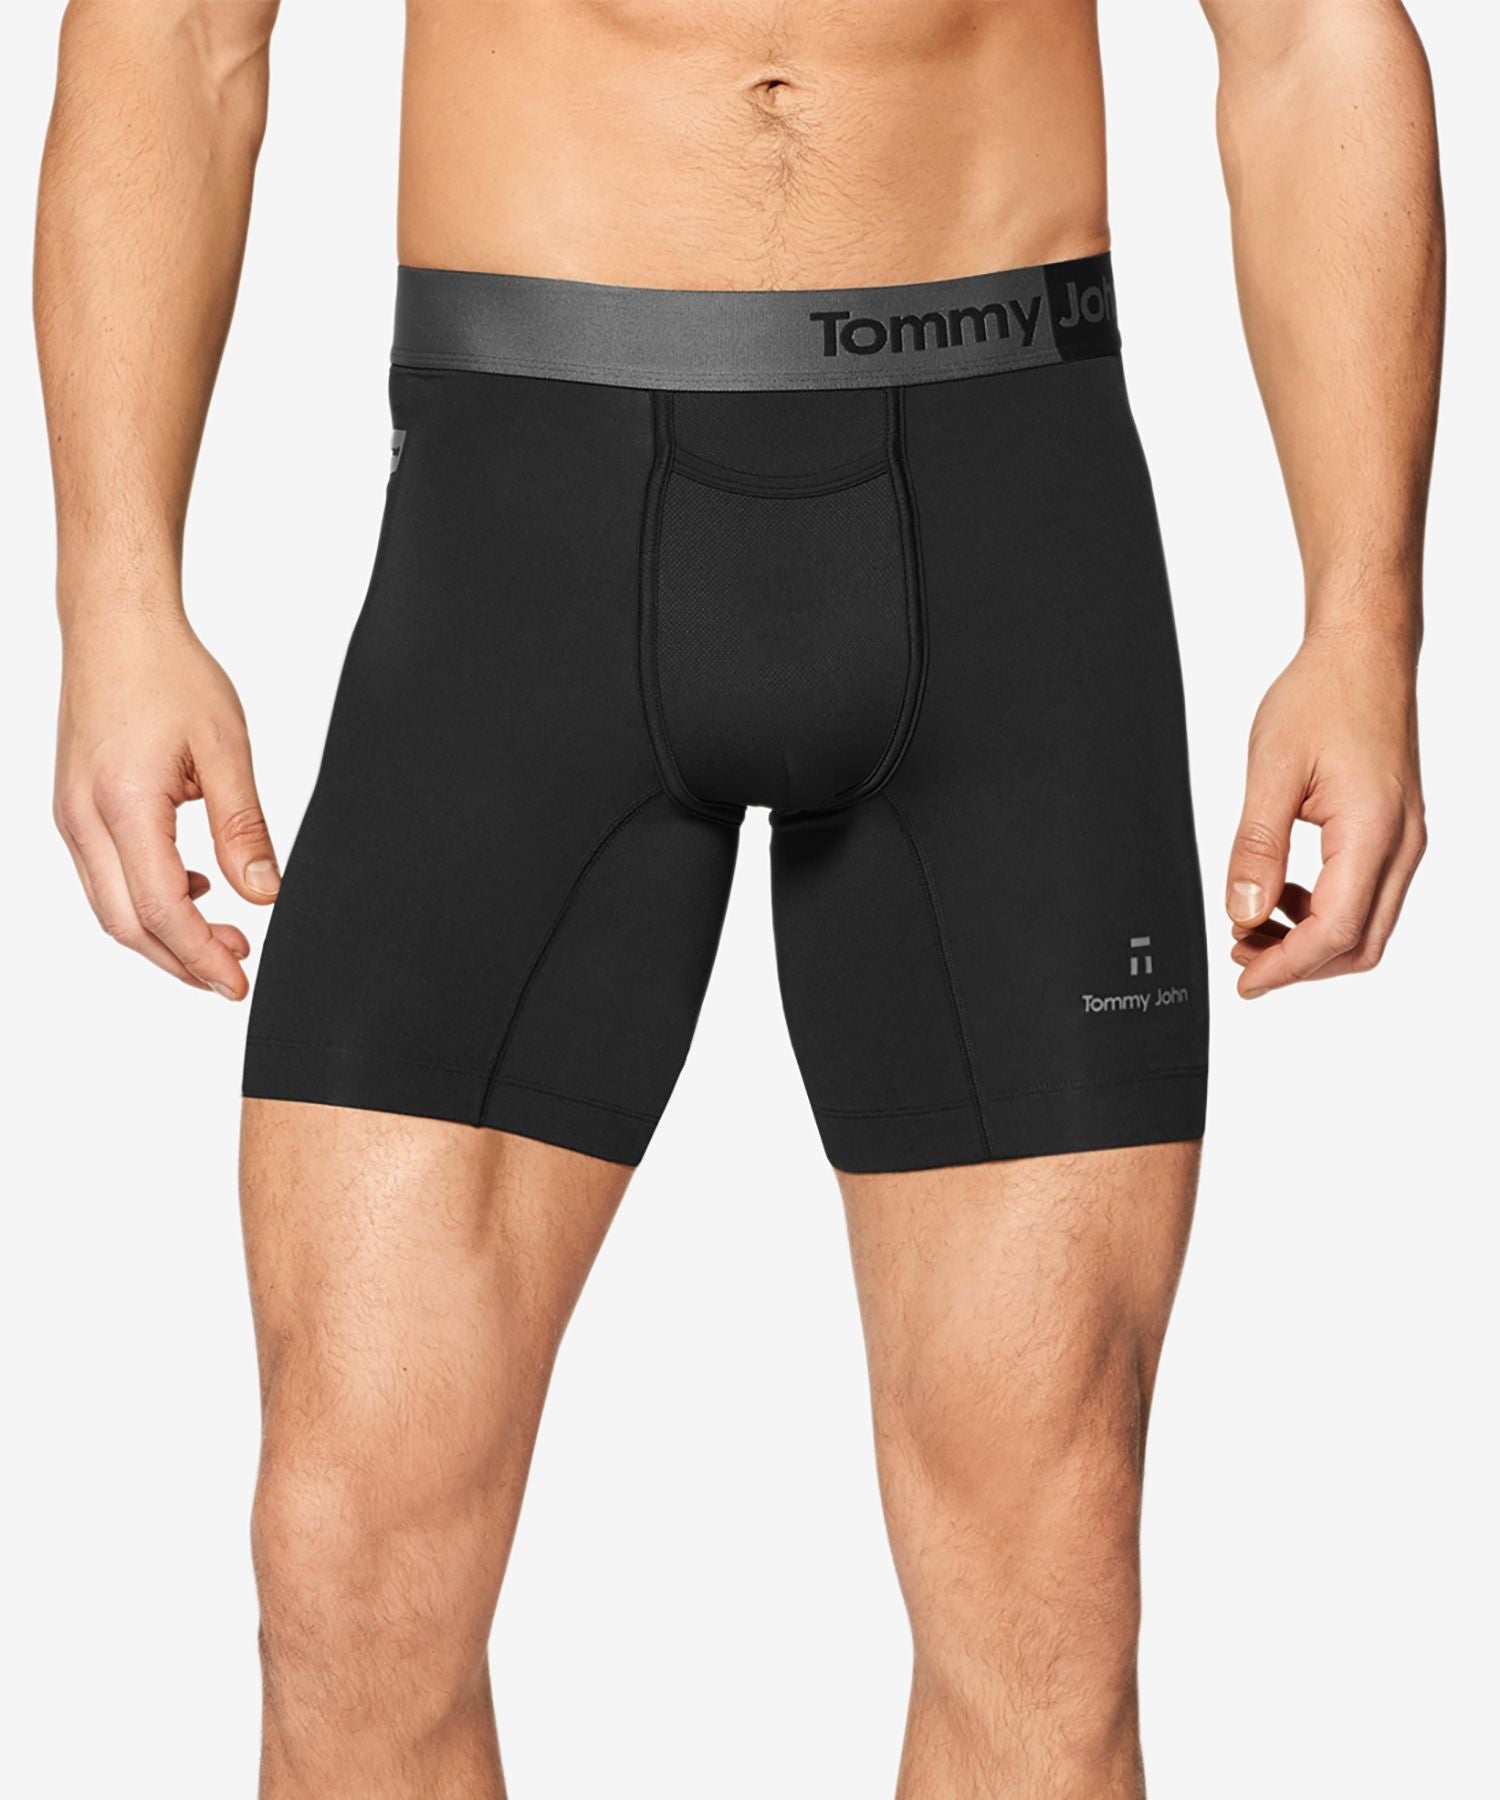 Tommy John 360 Sport 6 Boxer Brief